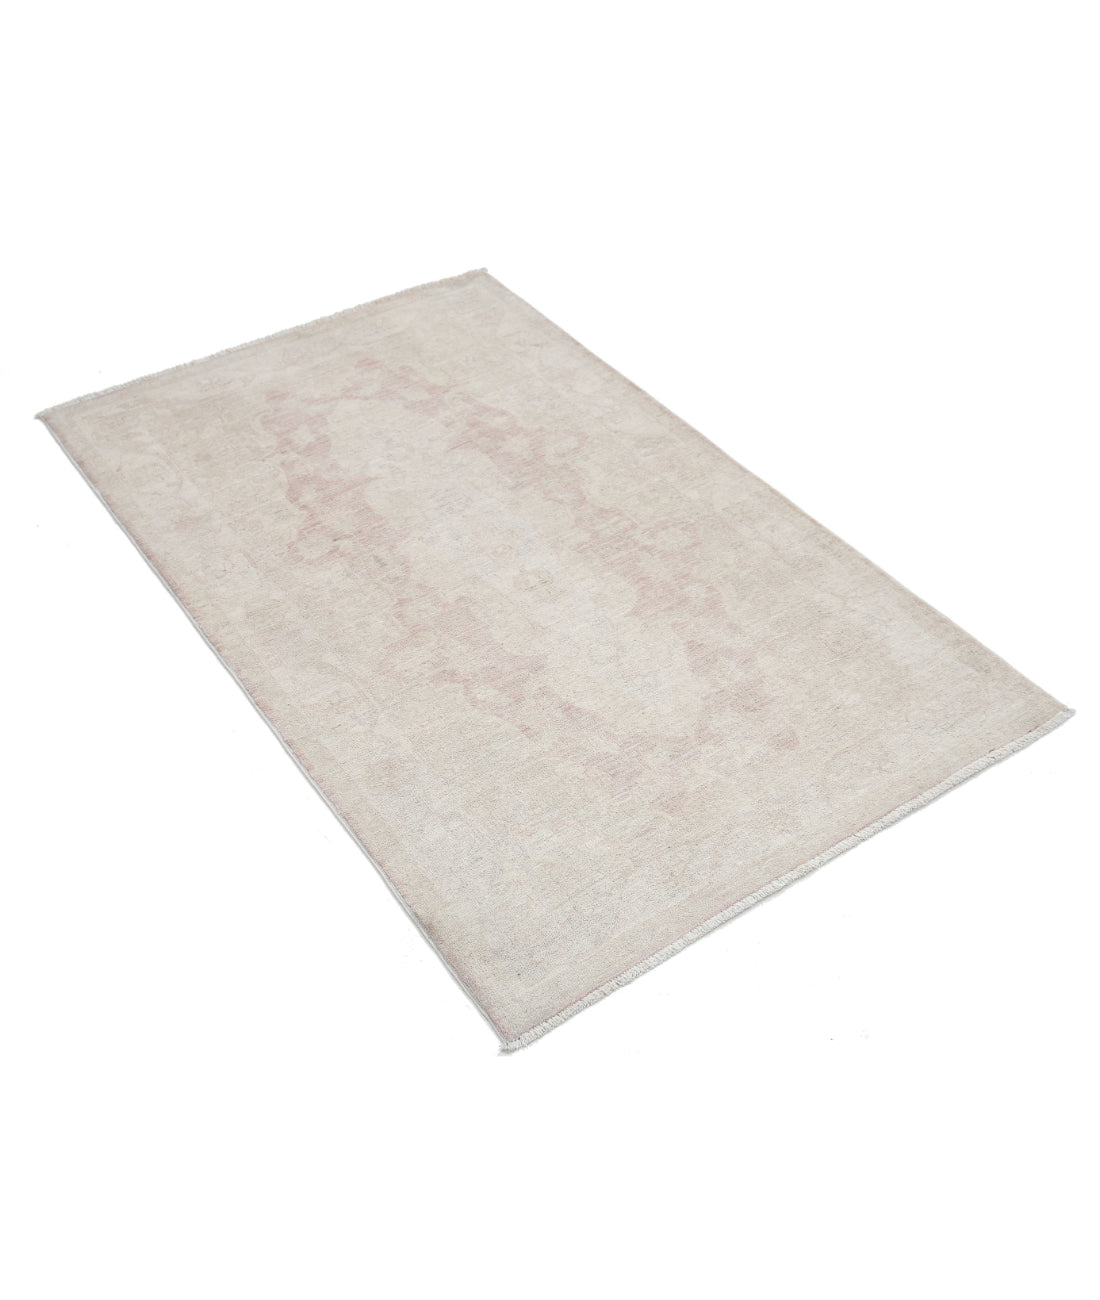 Hand Knotted Serenity Wool Rug - 2'11'' x 4'8'' 2'11'' x 4'8'' (88 X 140) / Pink / Ivory